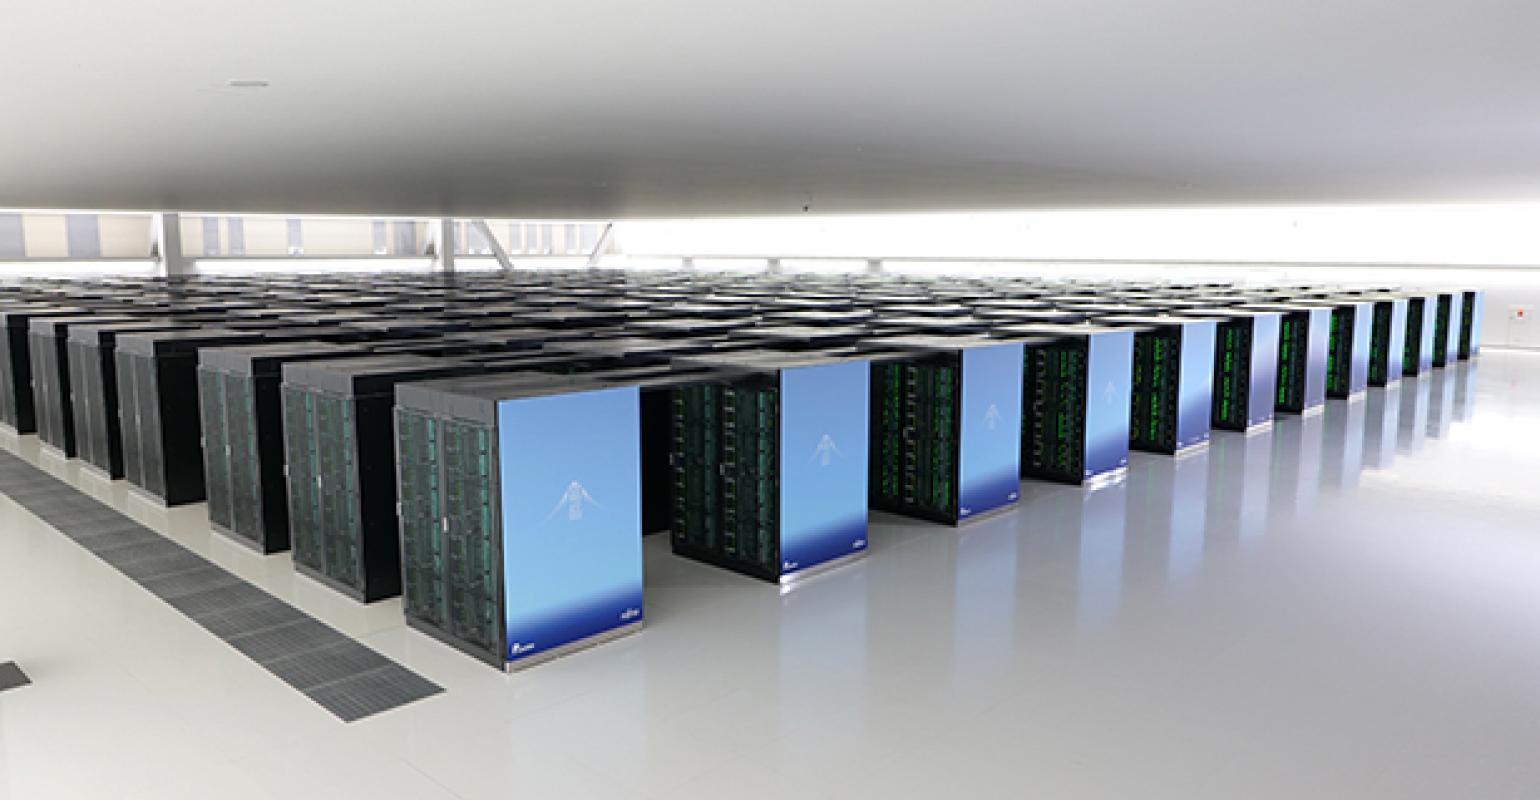 The World's 10 Fastest Supercomputers